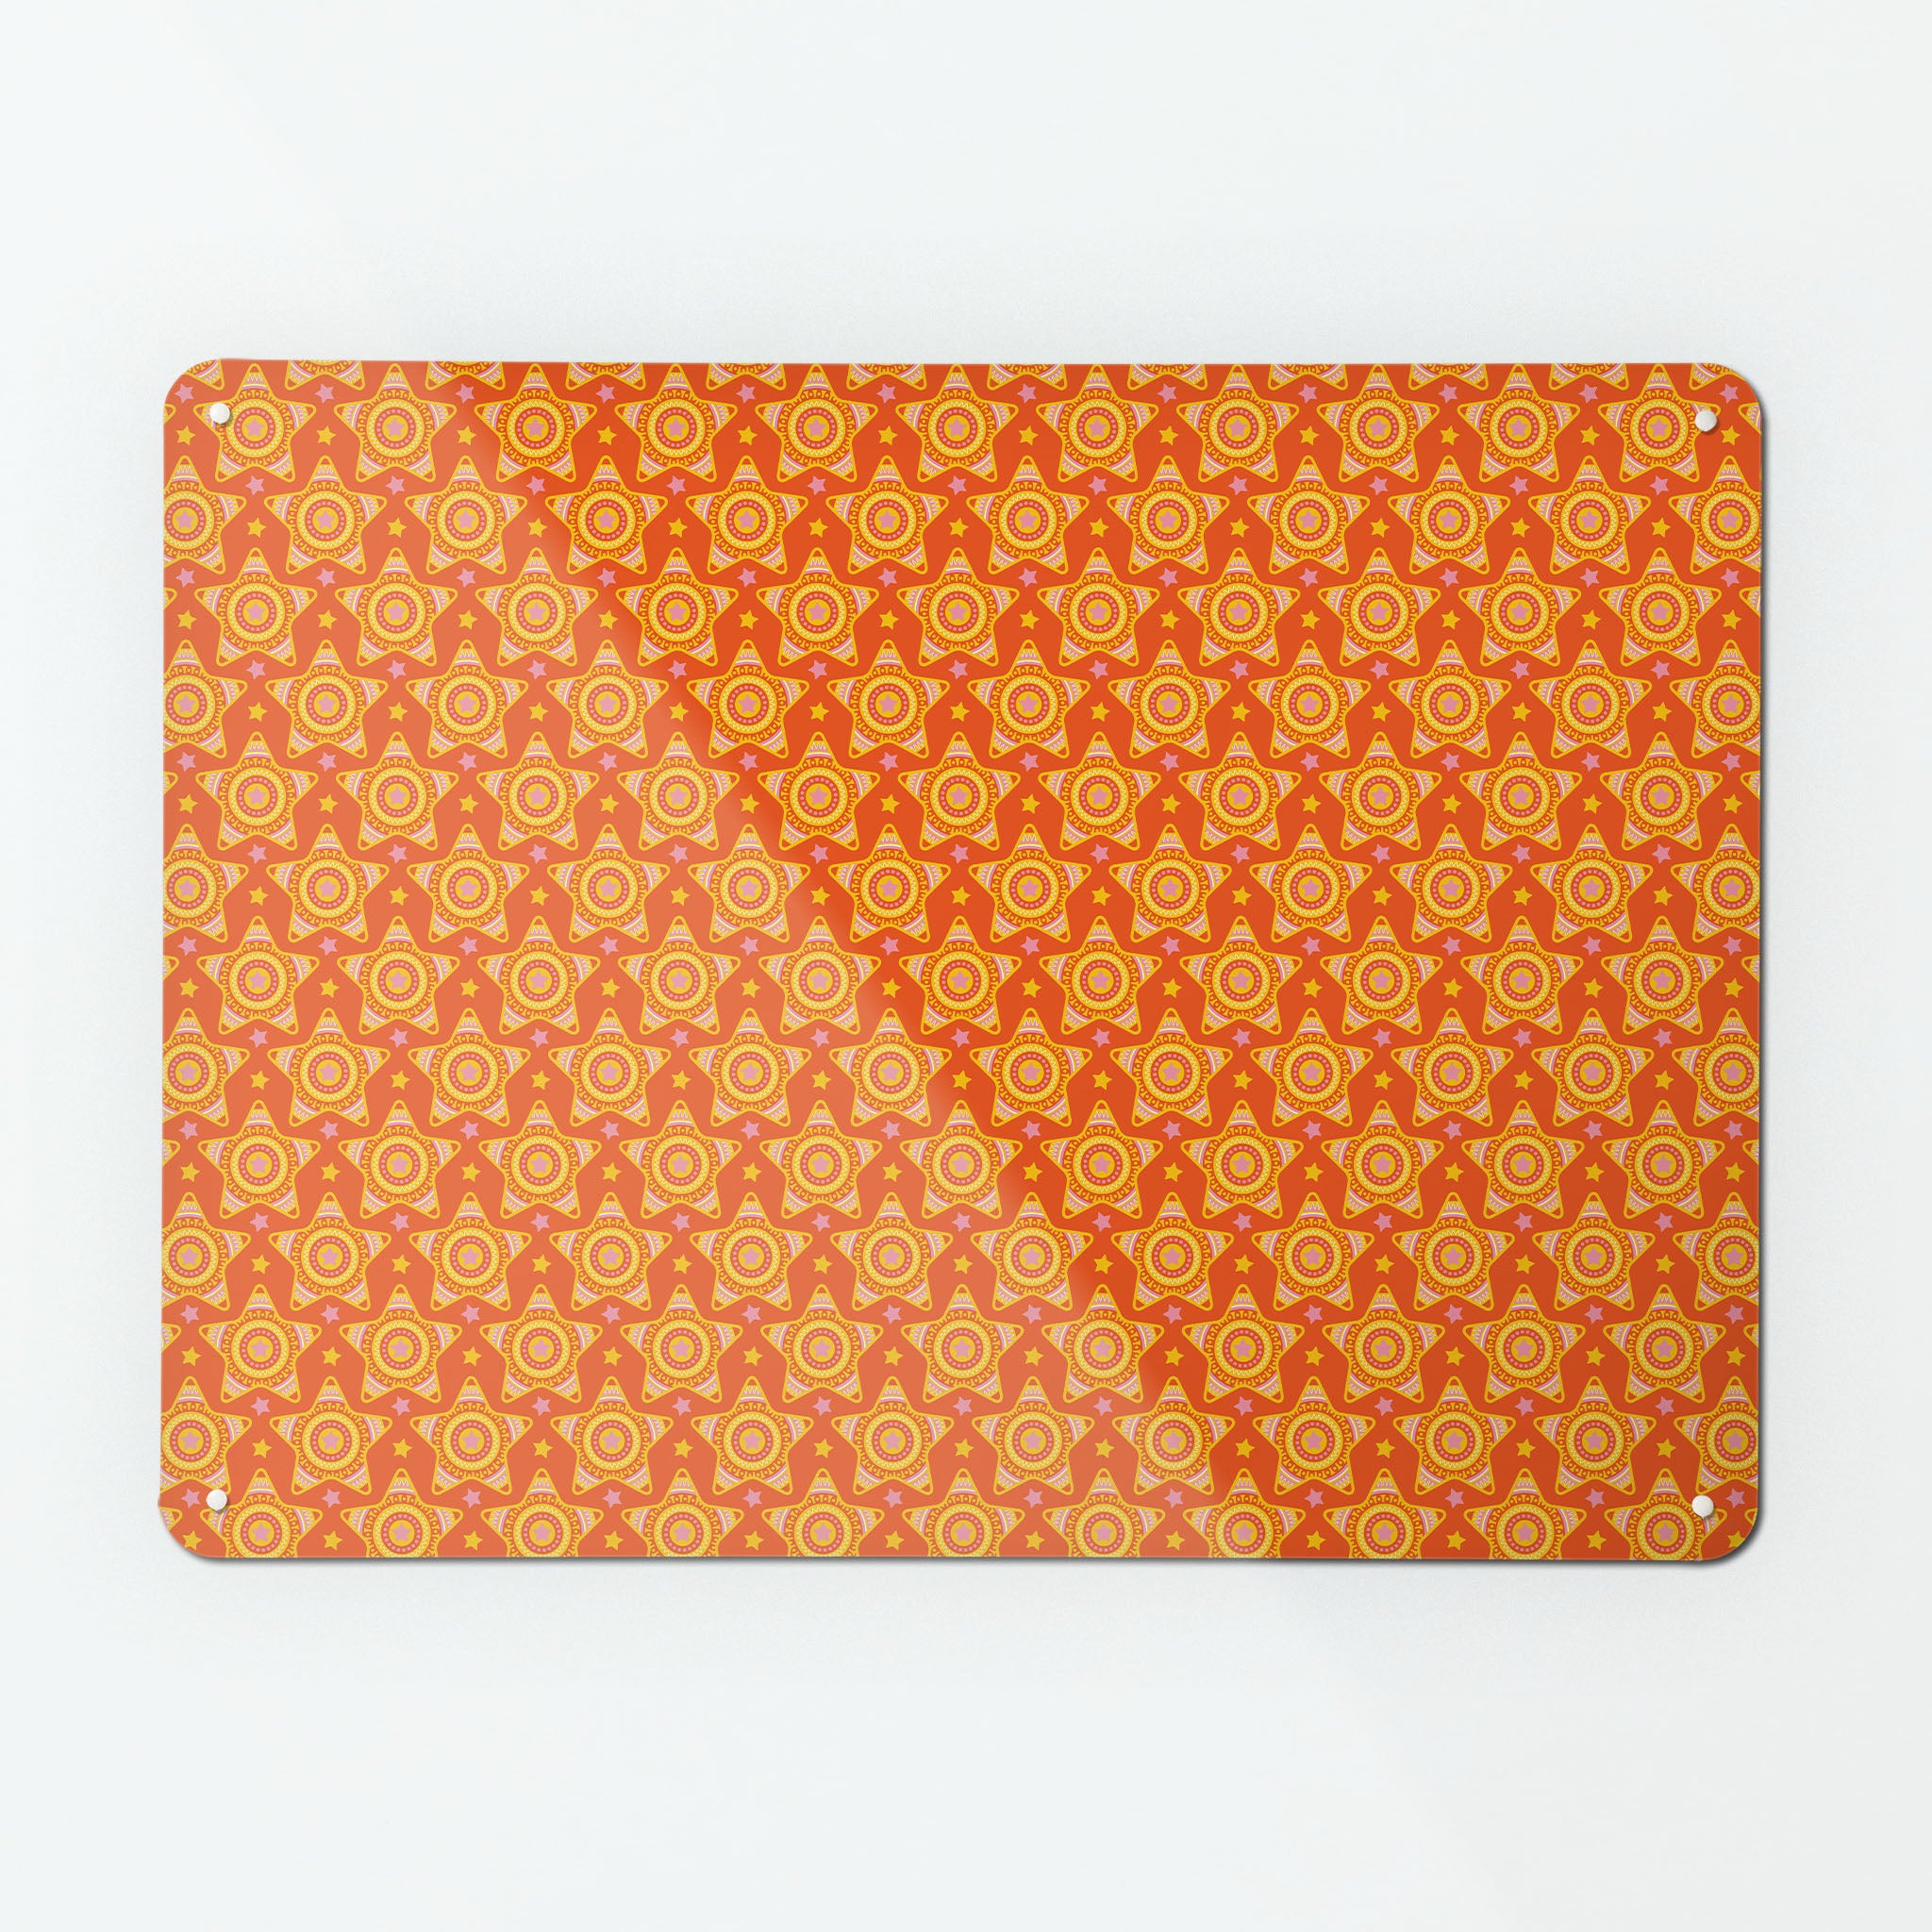 A large magnetic notice board by Beyond the Fridge with a stars on orange pattern